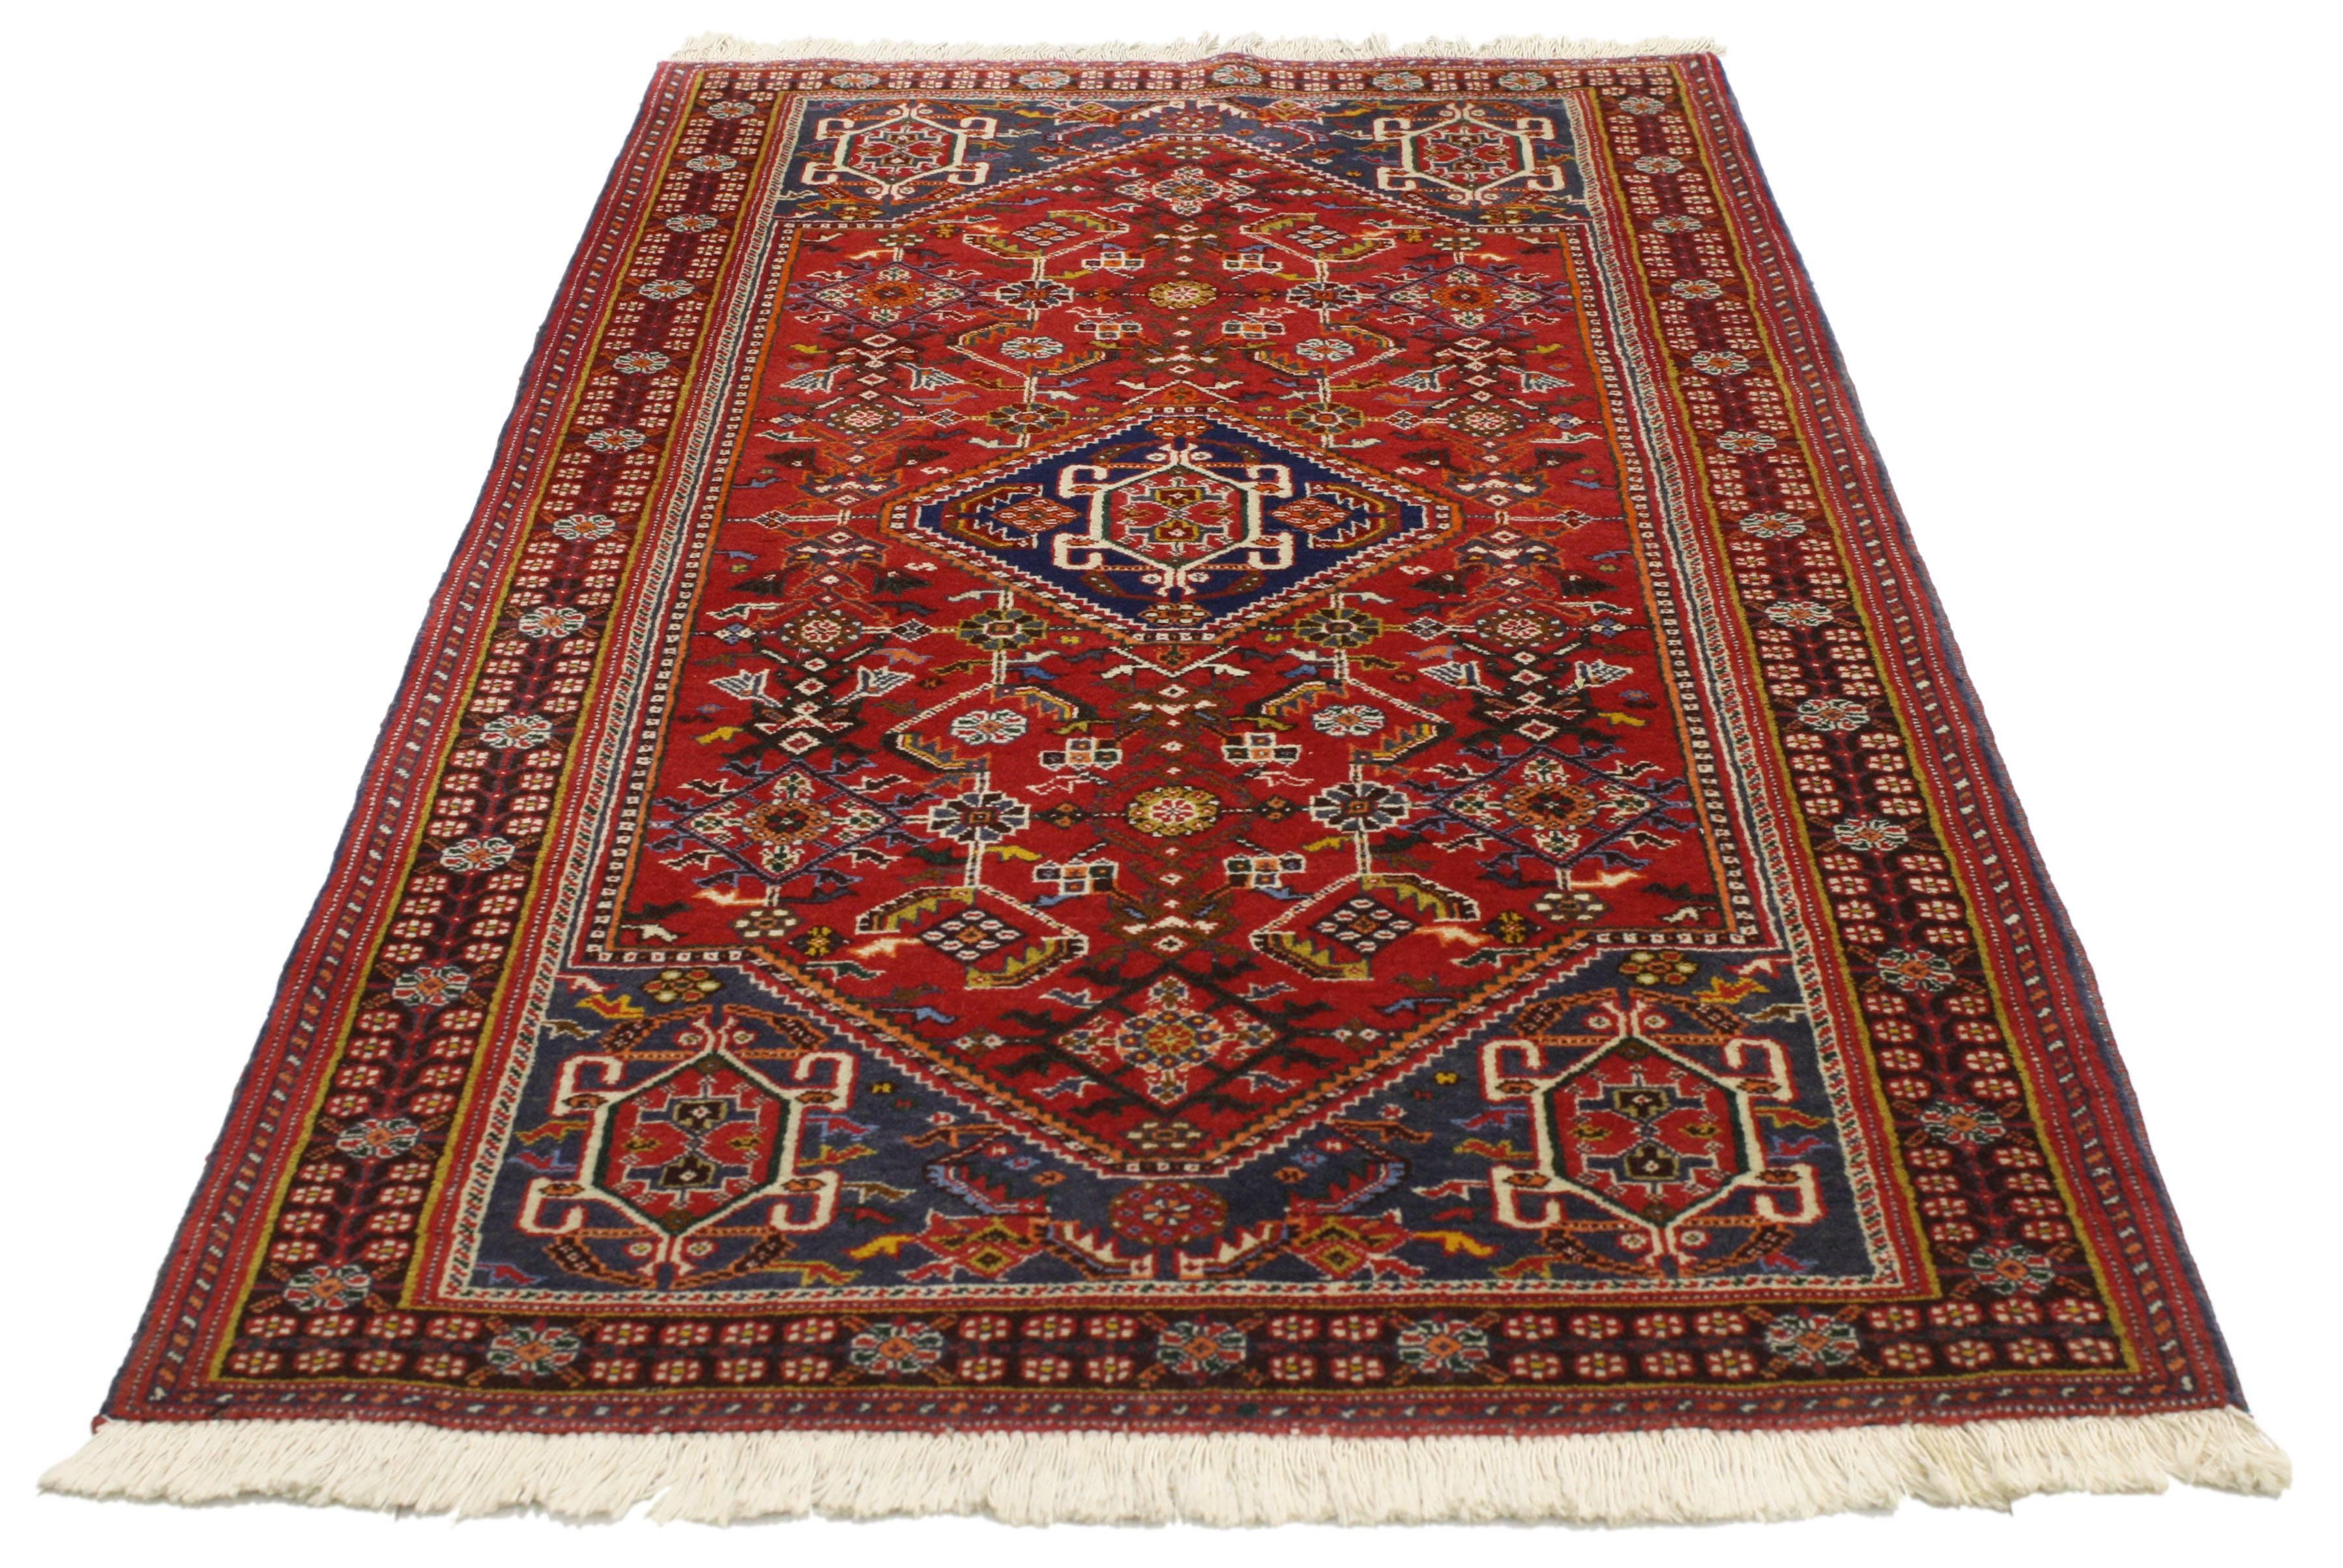 76996 vintage Persian Gashgai rug with tribal style Kashgai Qashqai tribal rug. Full of character of stately presence, this vintage Persian Gashgai rug with modern tribal style is exquisitely detailed. Featuring a blue center medallion and